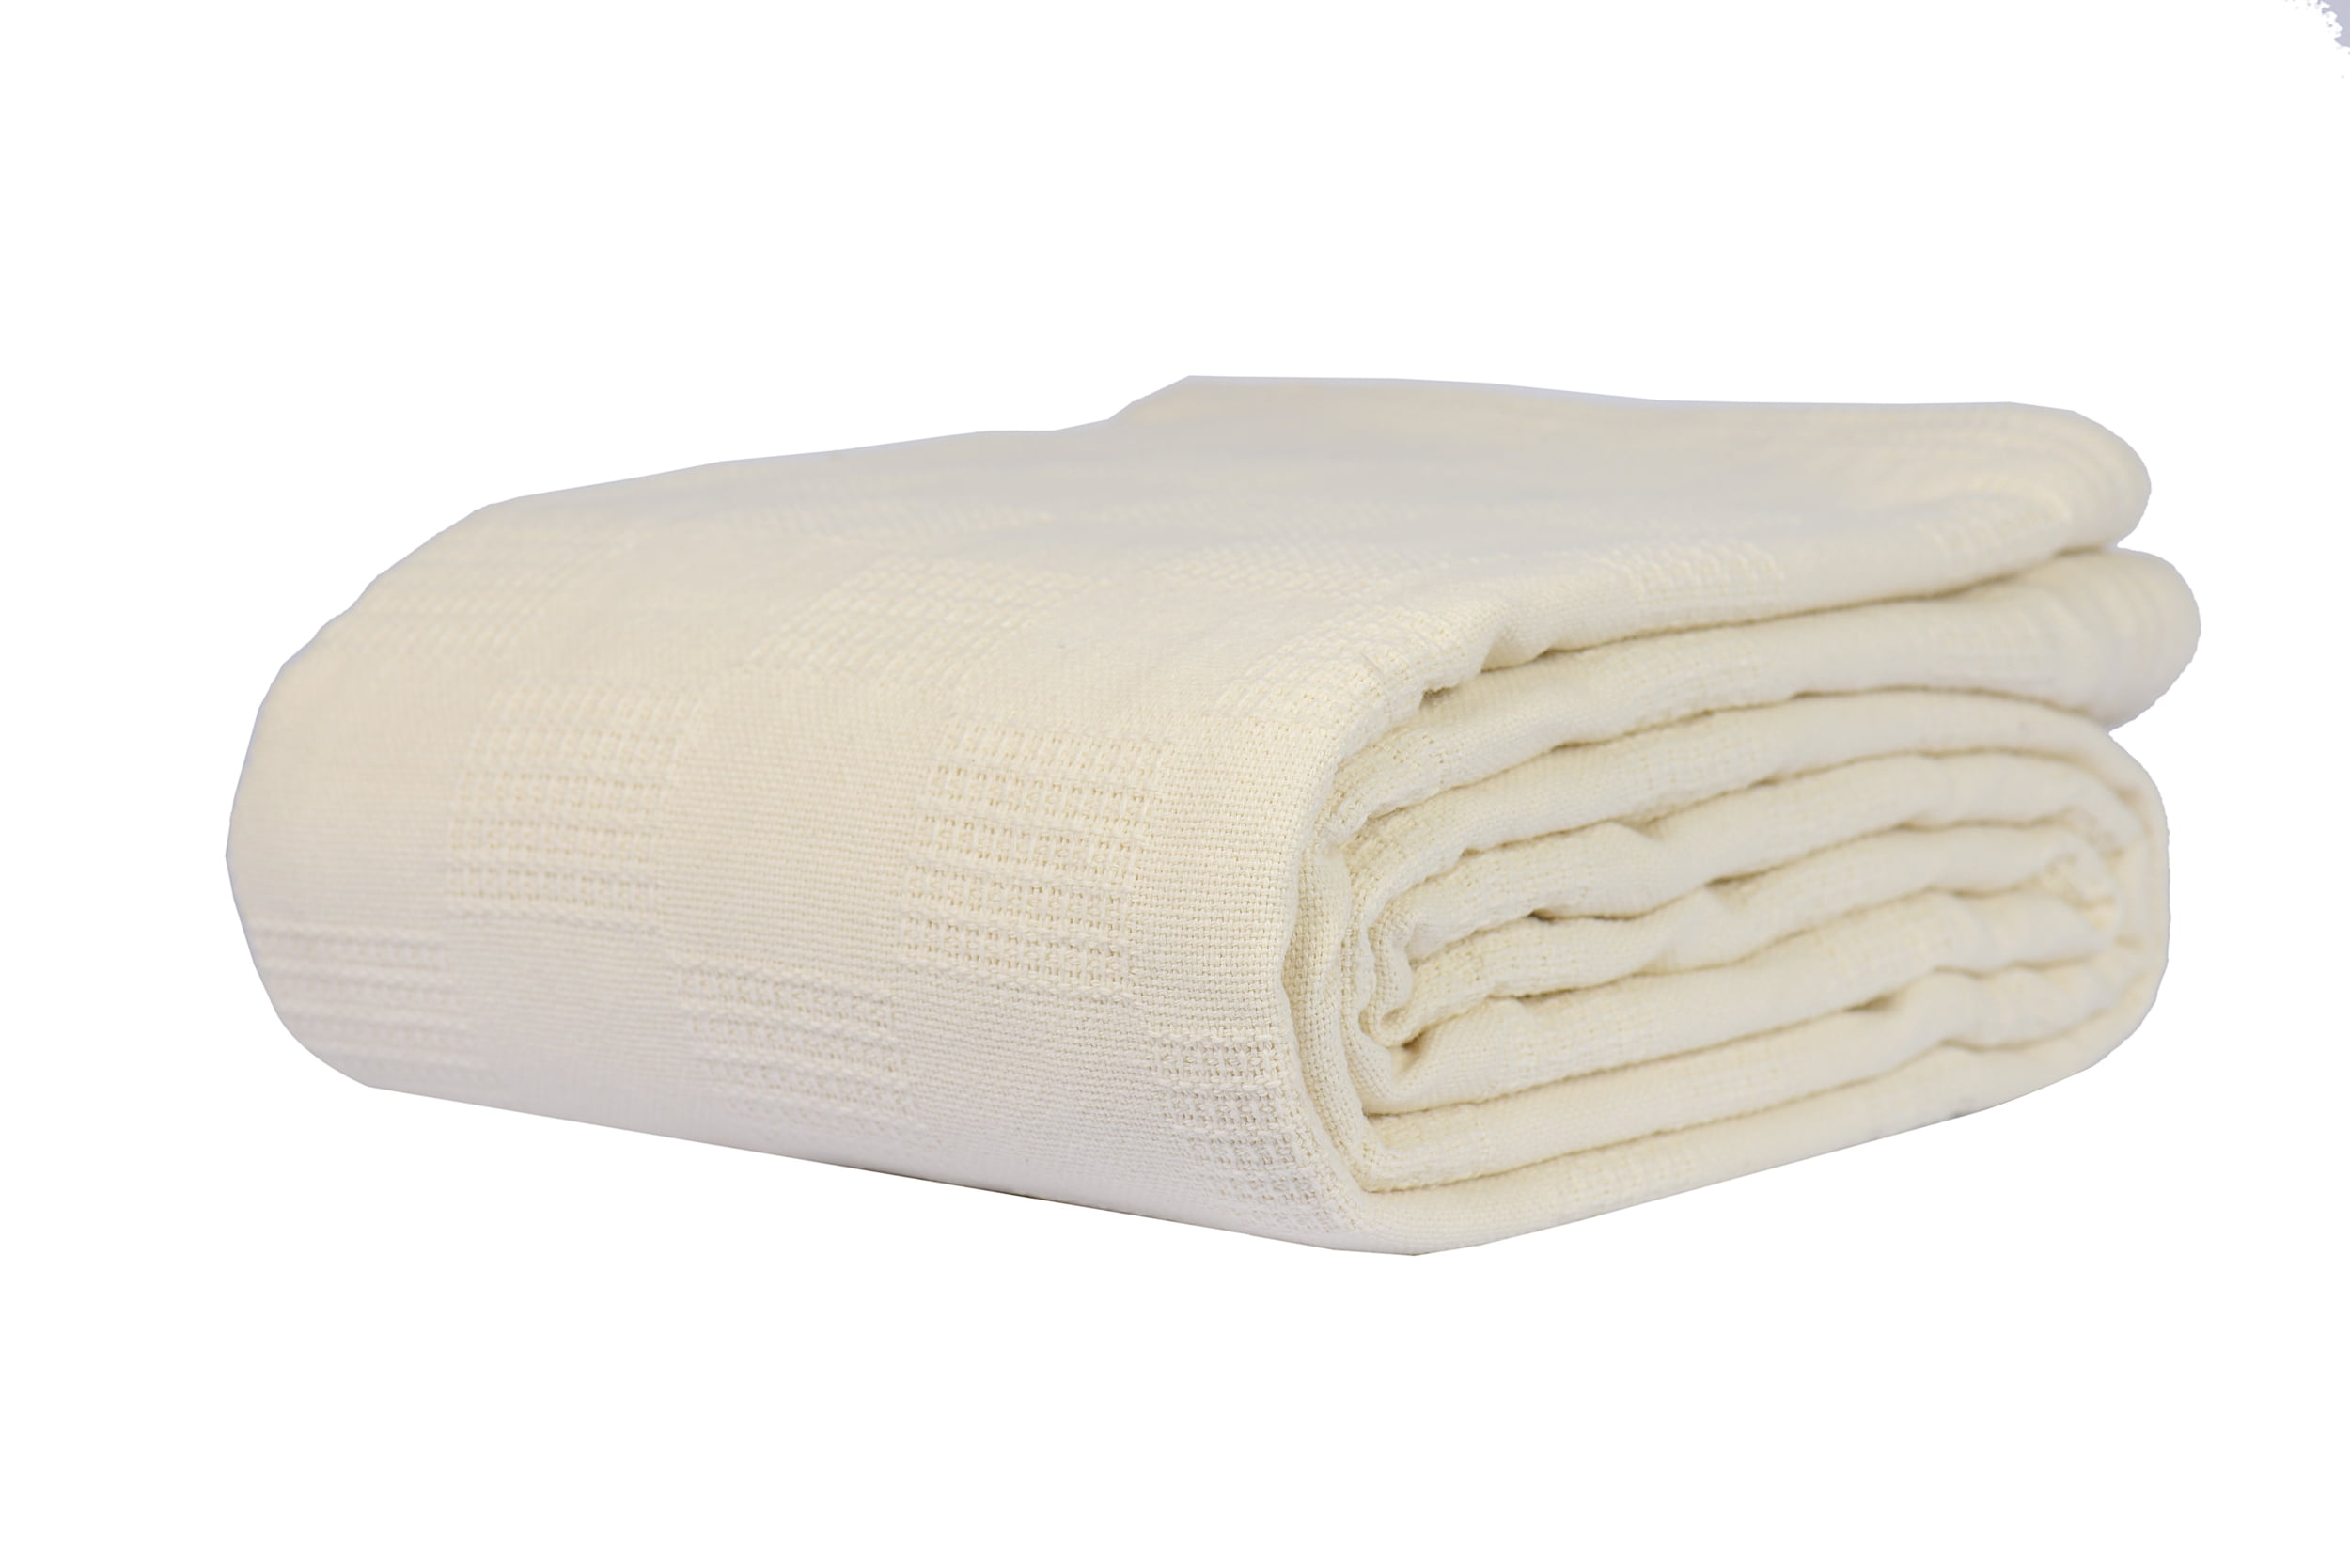 Linteum Textile Hospital Thermal SNAGLESS Spread Blanket, 100% Cotton  (74x100 in, White)